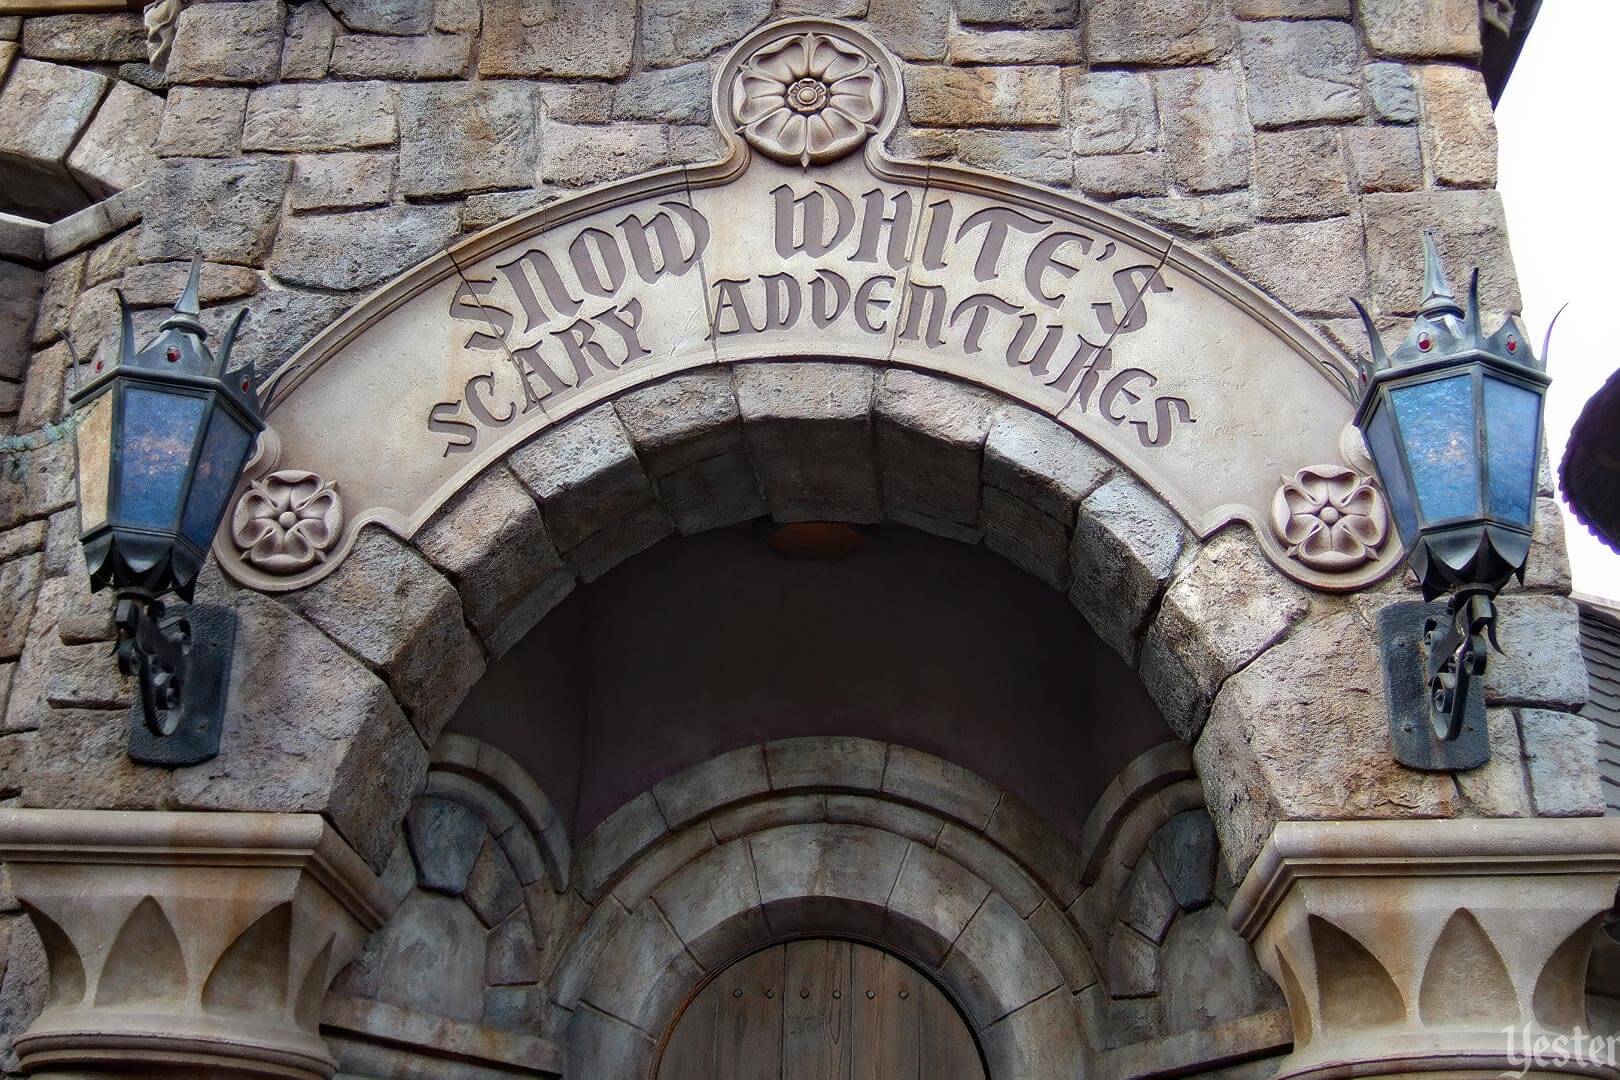 Yesterland: Snow White’s Scary Adventures